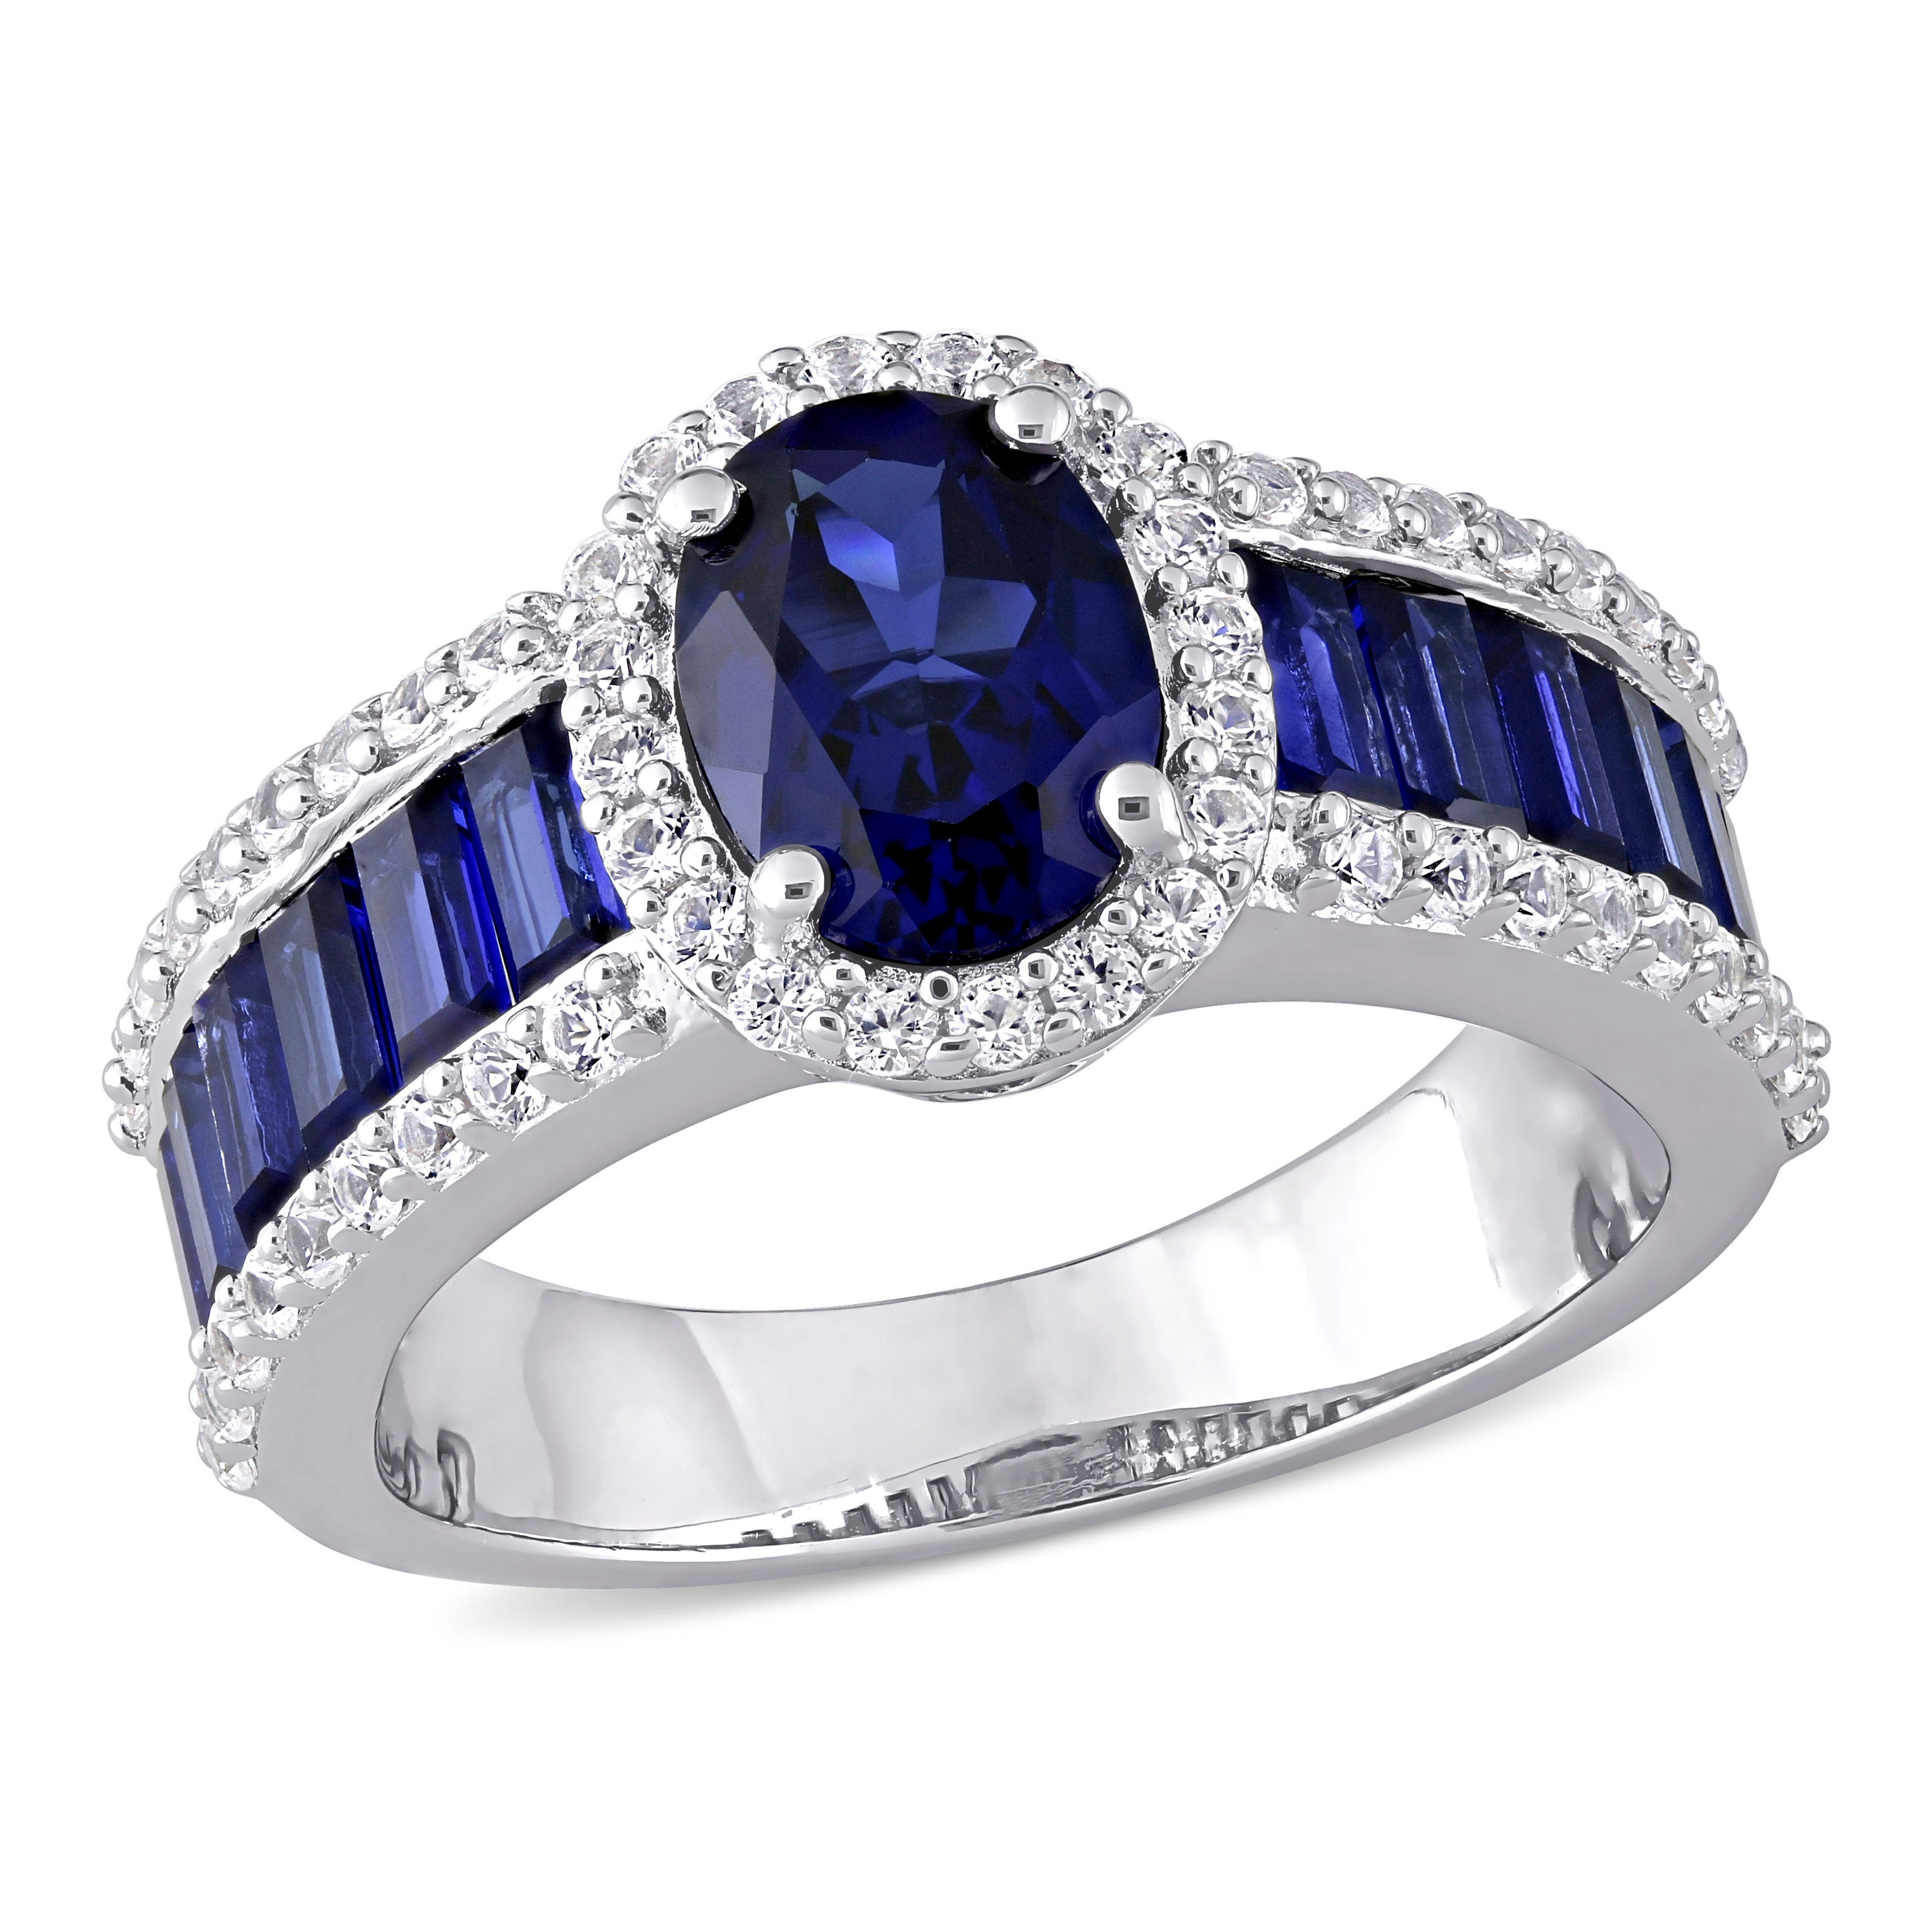 4 3/4 CT TGW Created Blue Sapphire and Created White Sapphire Vintage Halo Ring in Sterling Silver